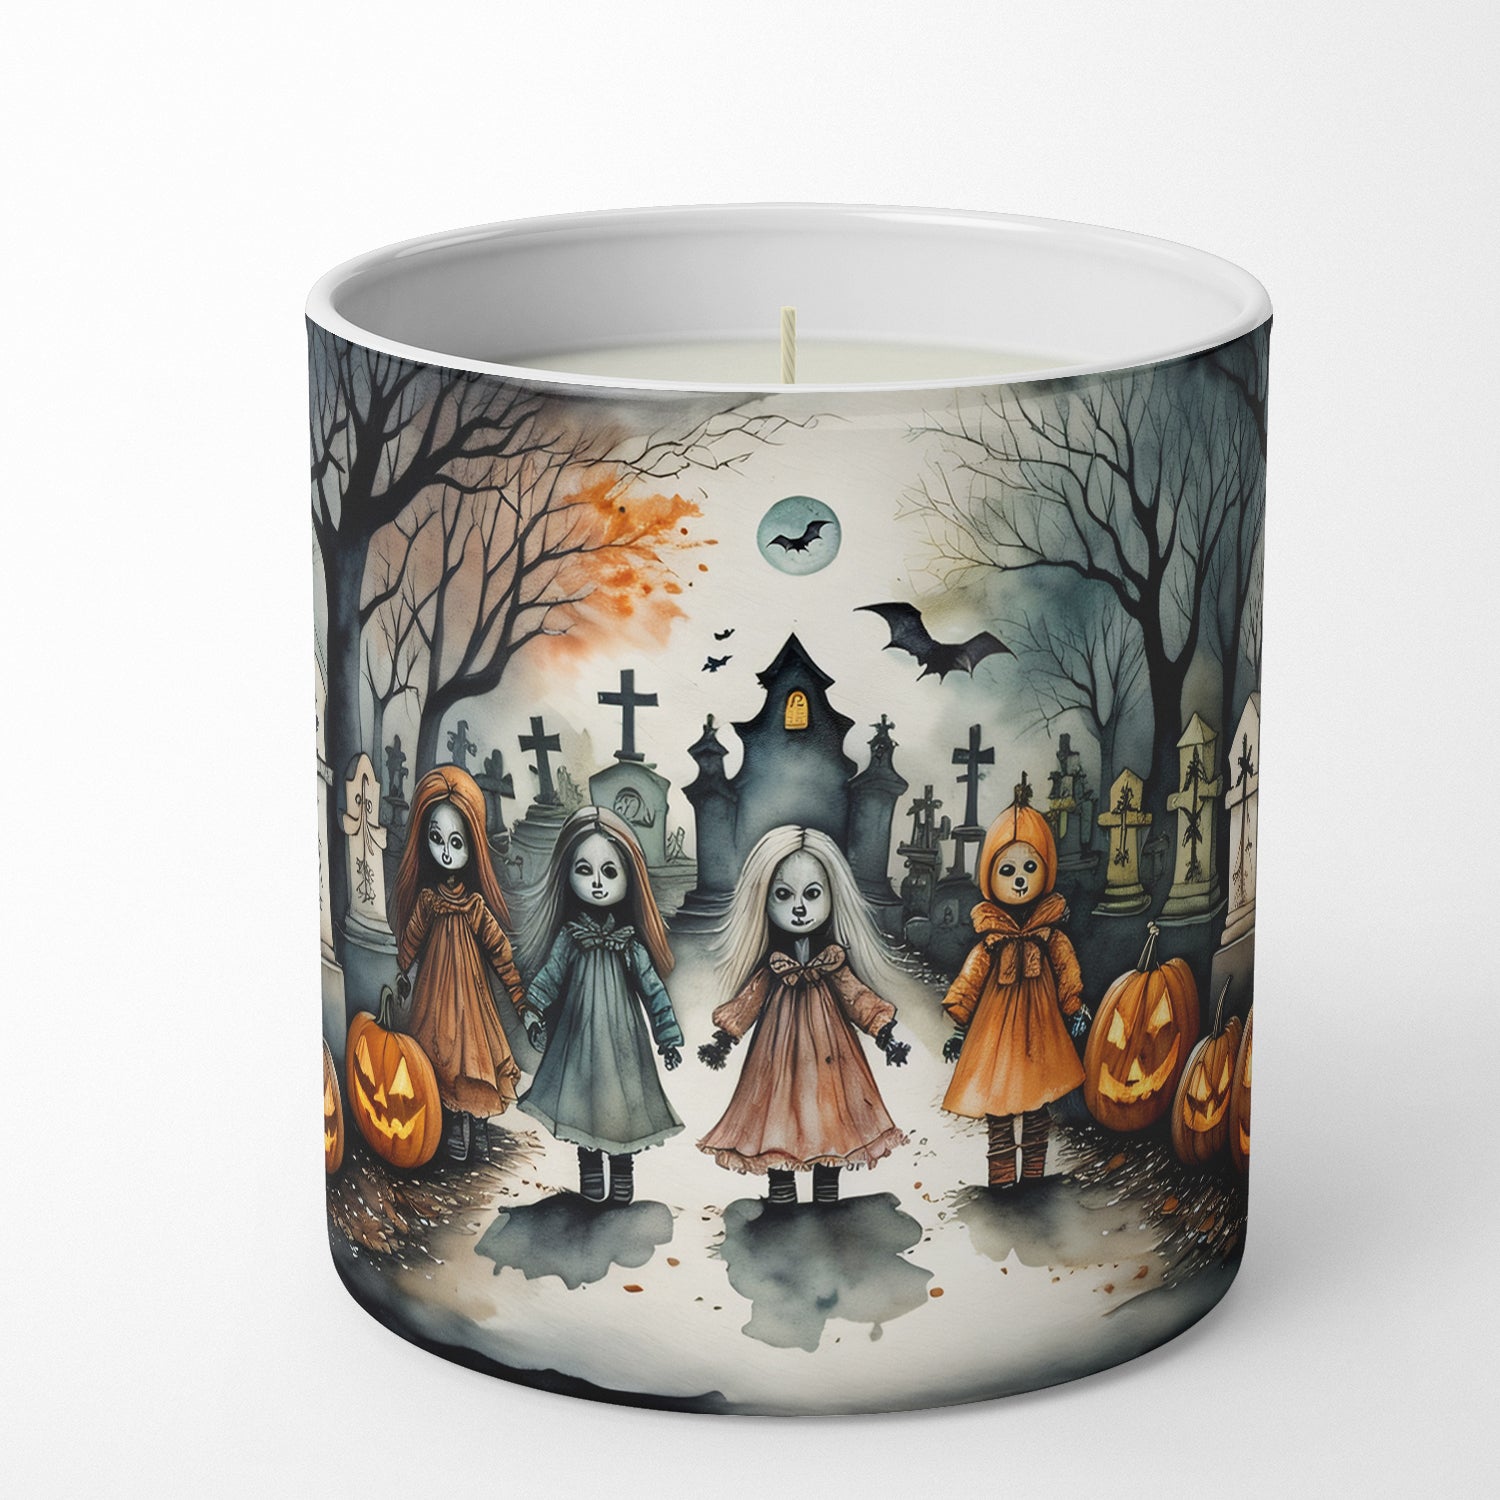 Buy this Creepy Dolls Spooky Halloween Decorative Soy Candle